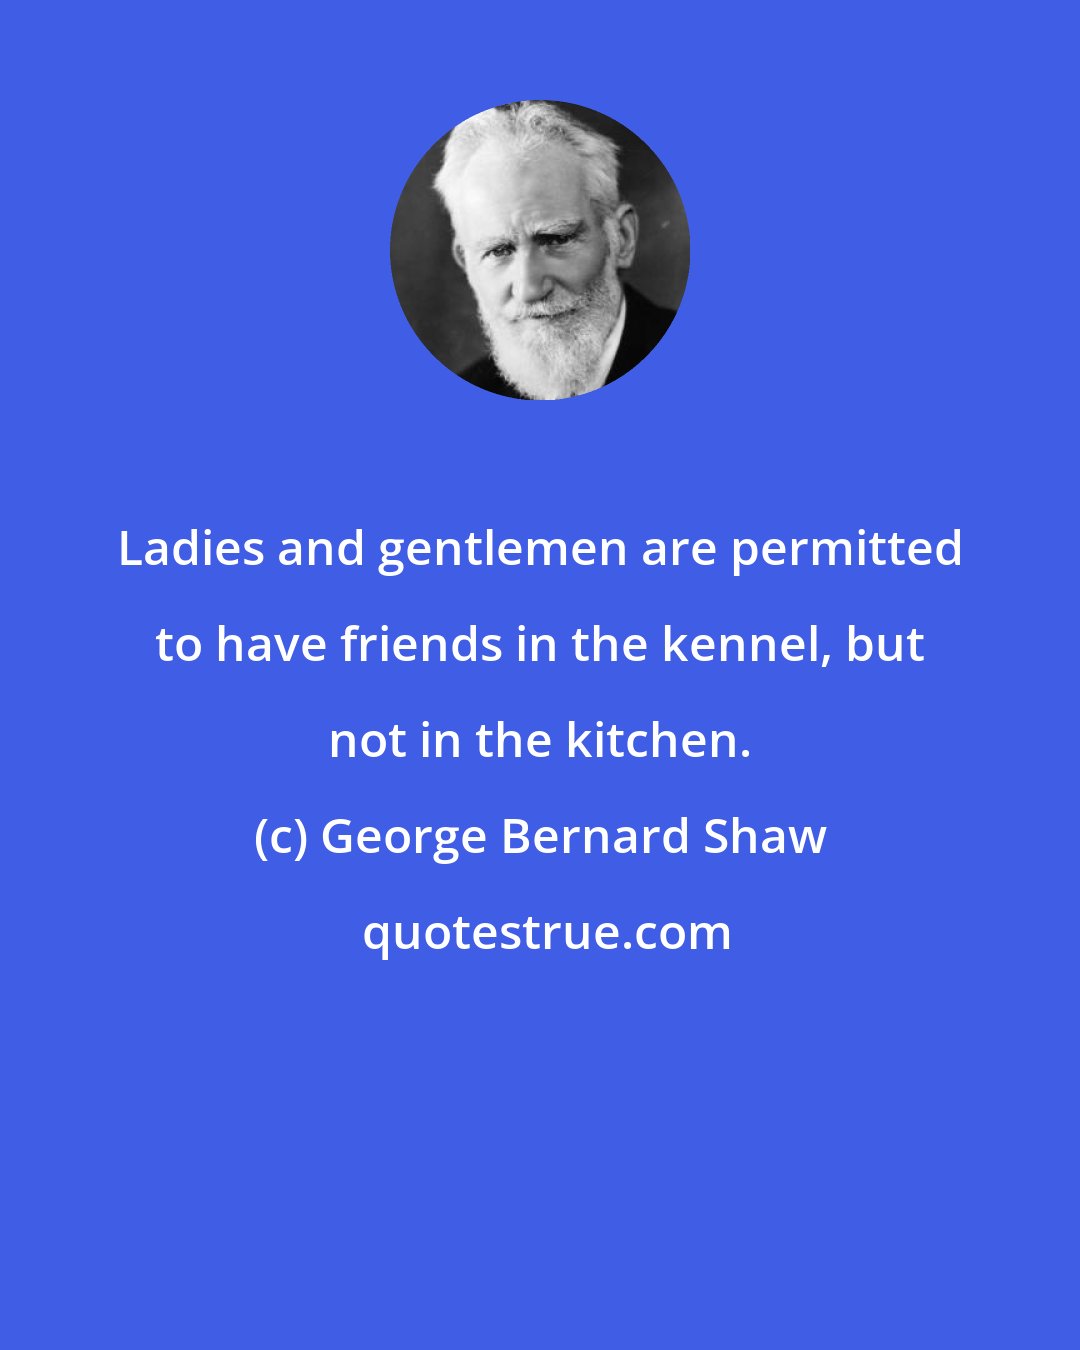 George Bernard Shaw: Ladies and gentlemen are permitted to have friends in the kennel, but not in the kitchen.